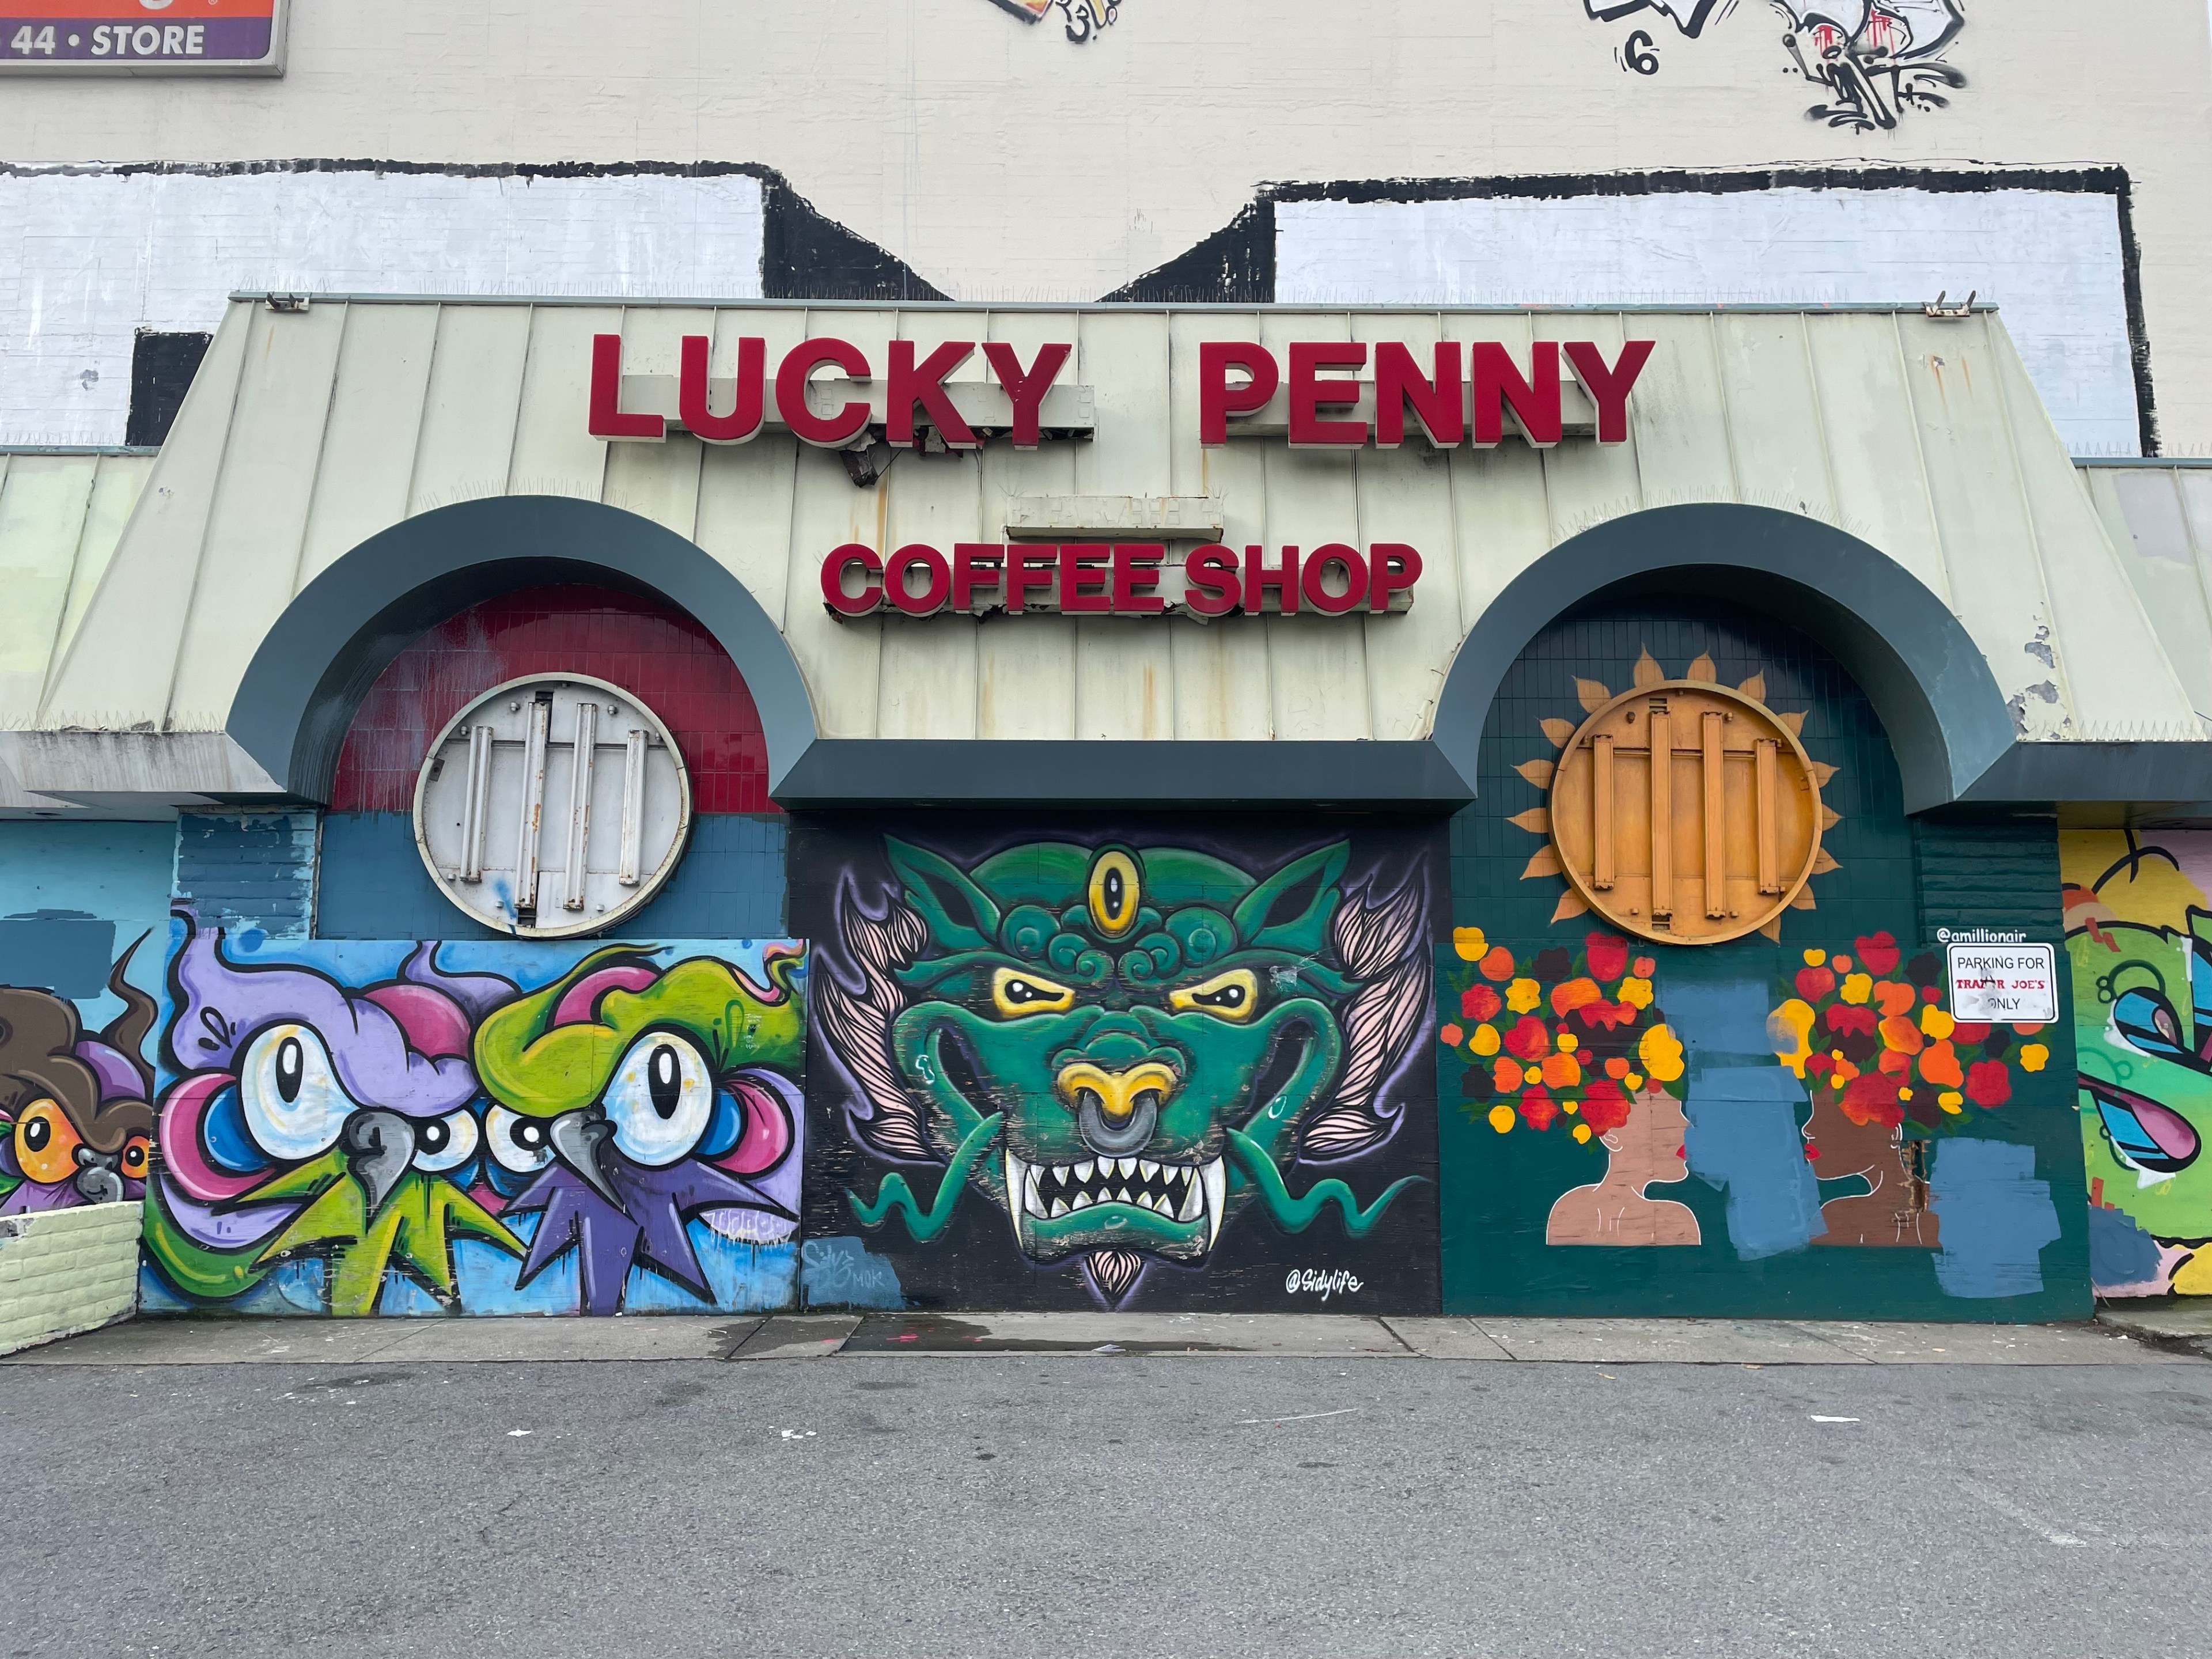 A boarded-up diner is covered with murals and graffiti.